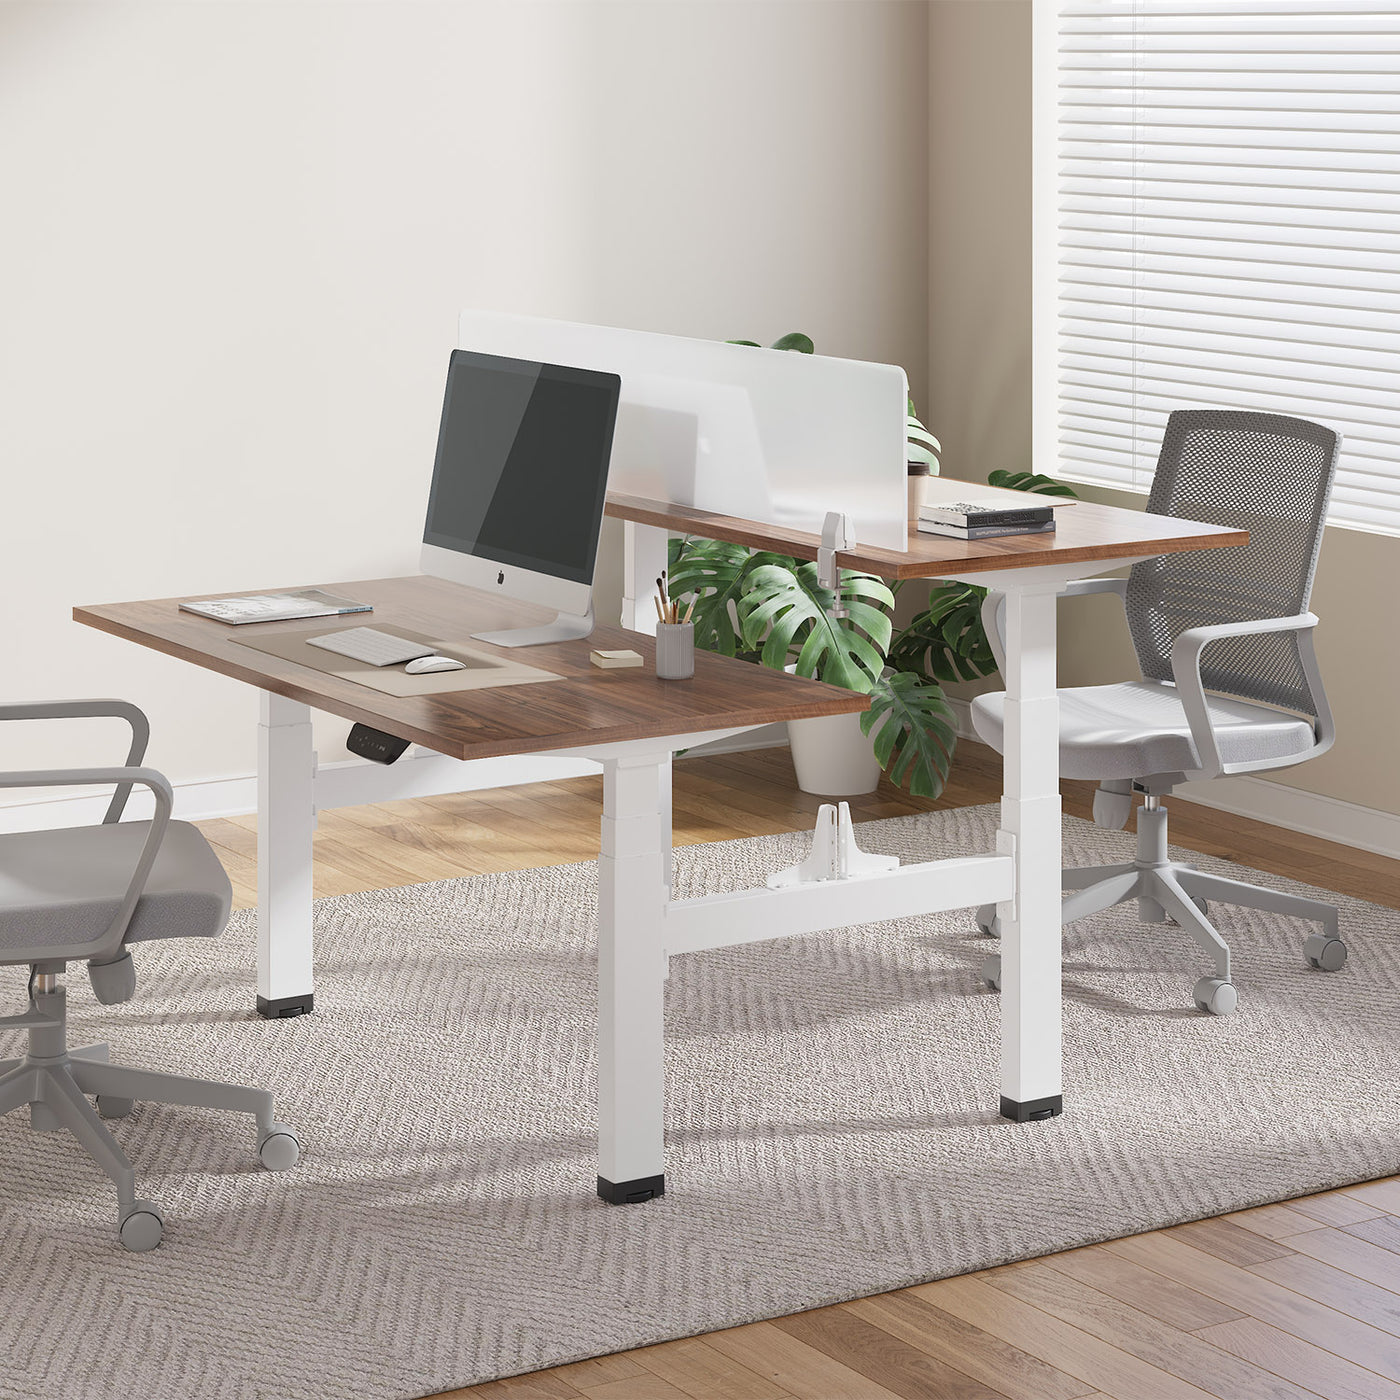 Ergo Office electric double height adjustable desk, max height 128cm, max 125kg x2, without standing/sitting top (2 parts), white, ER-404W